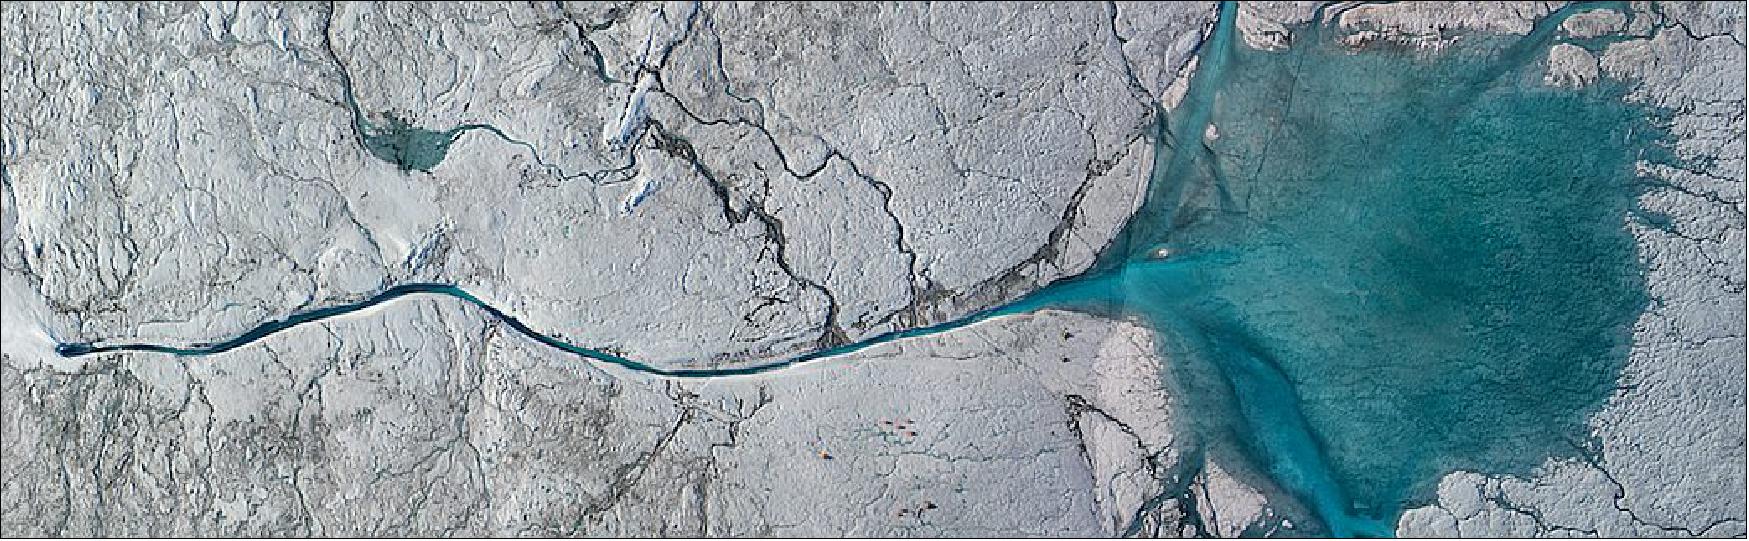 Figure 37: At the fringes of the Greenland Ice Sheet, where glaciers are constantly melting, water rushes everywhere through an intricate system of lakes and streams that branch out like slip and slide shoots of super chilled, bright turquoise water. Some of that water eventually cascades straight into the surrounding land and ocean through channels and cracks. Some of it thunders off into sinkhole-like structures on the ice called moulins. Rumbling 24 hours a day, these holes swallow water from the surface and funnel it to the bedrock at the base of the ice (image credit: Laurence C. Smith)